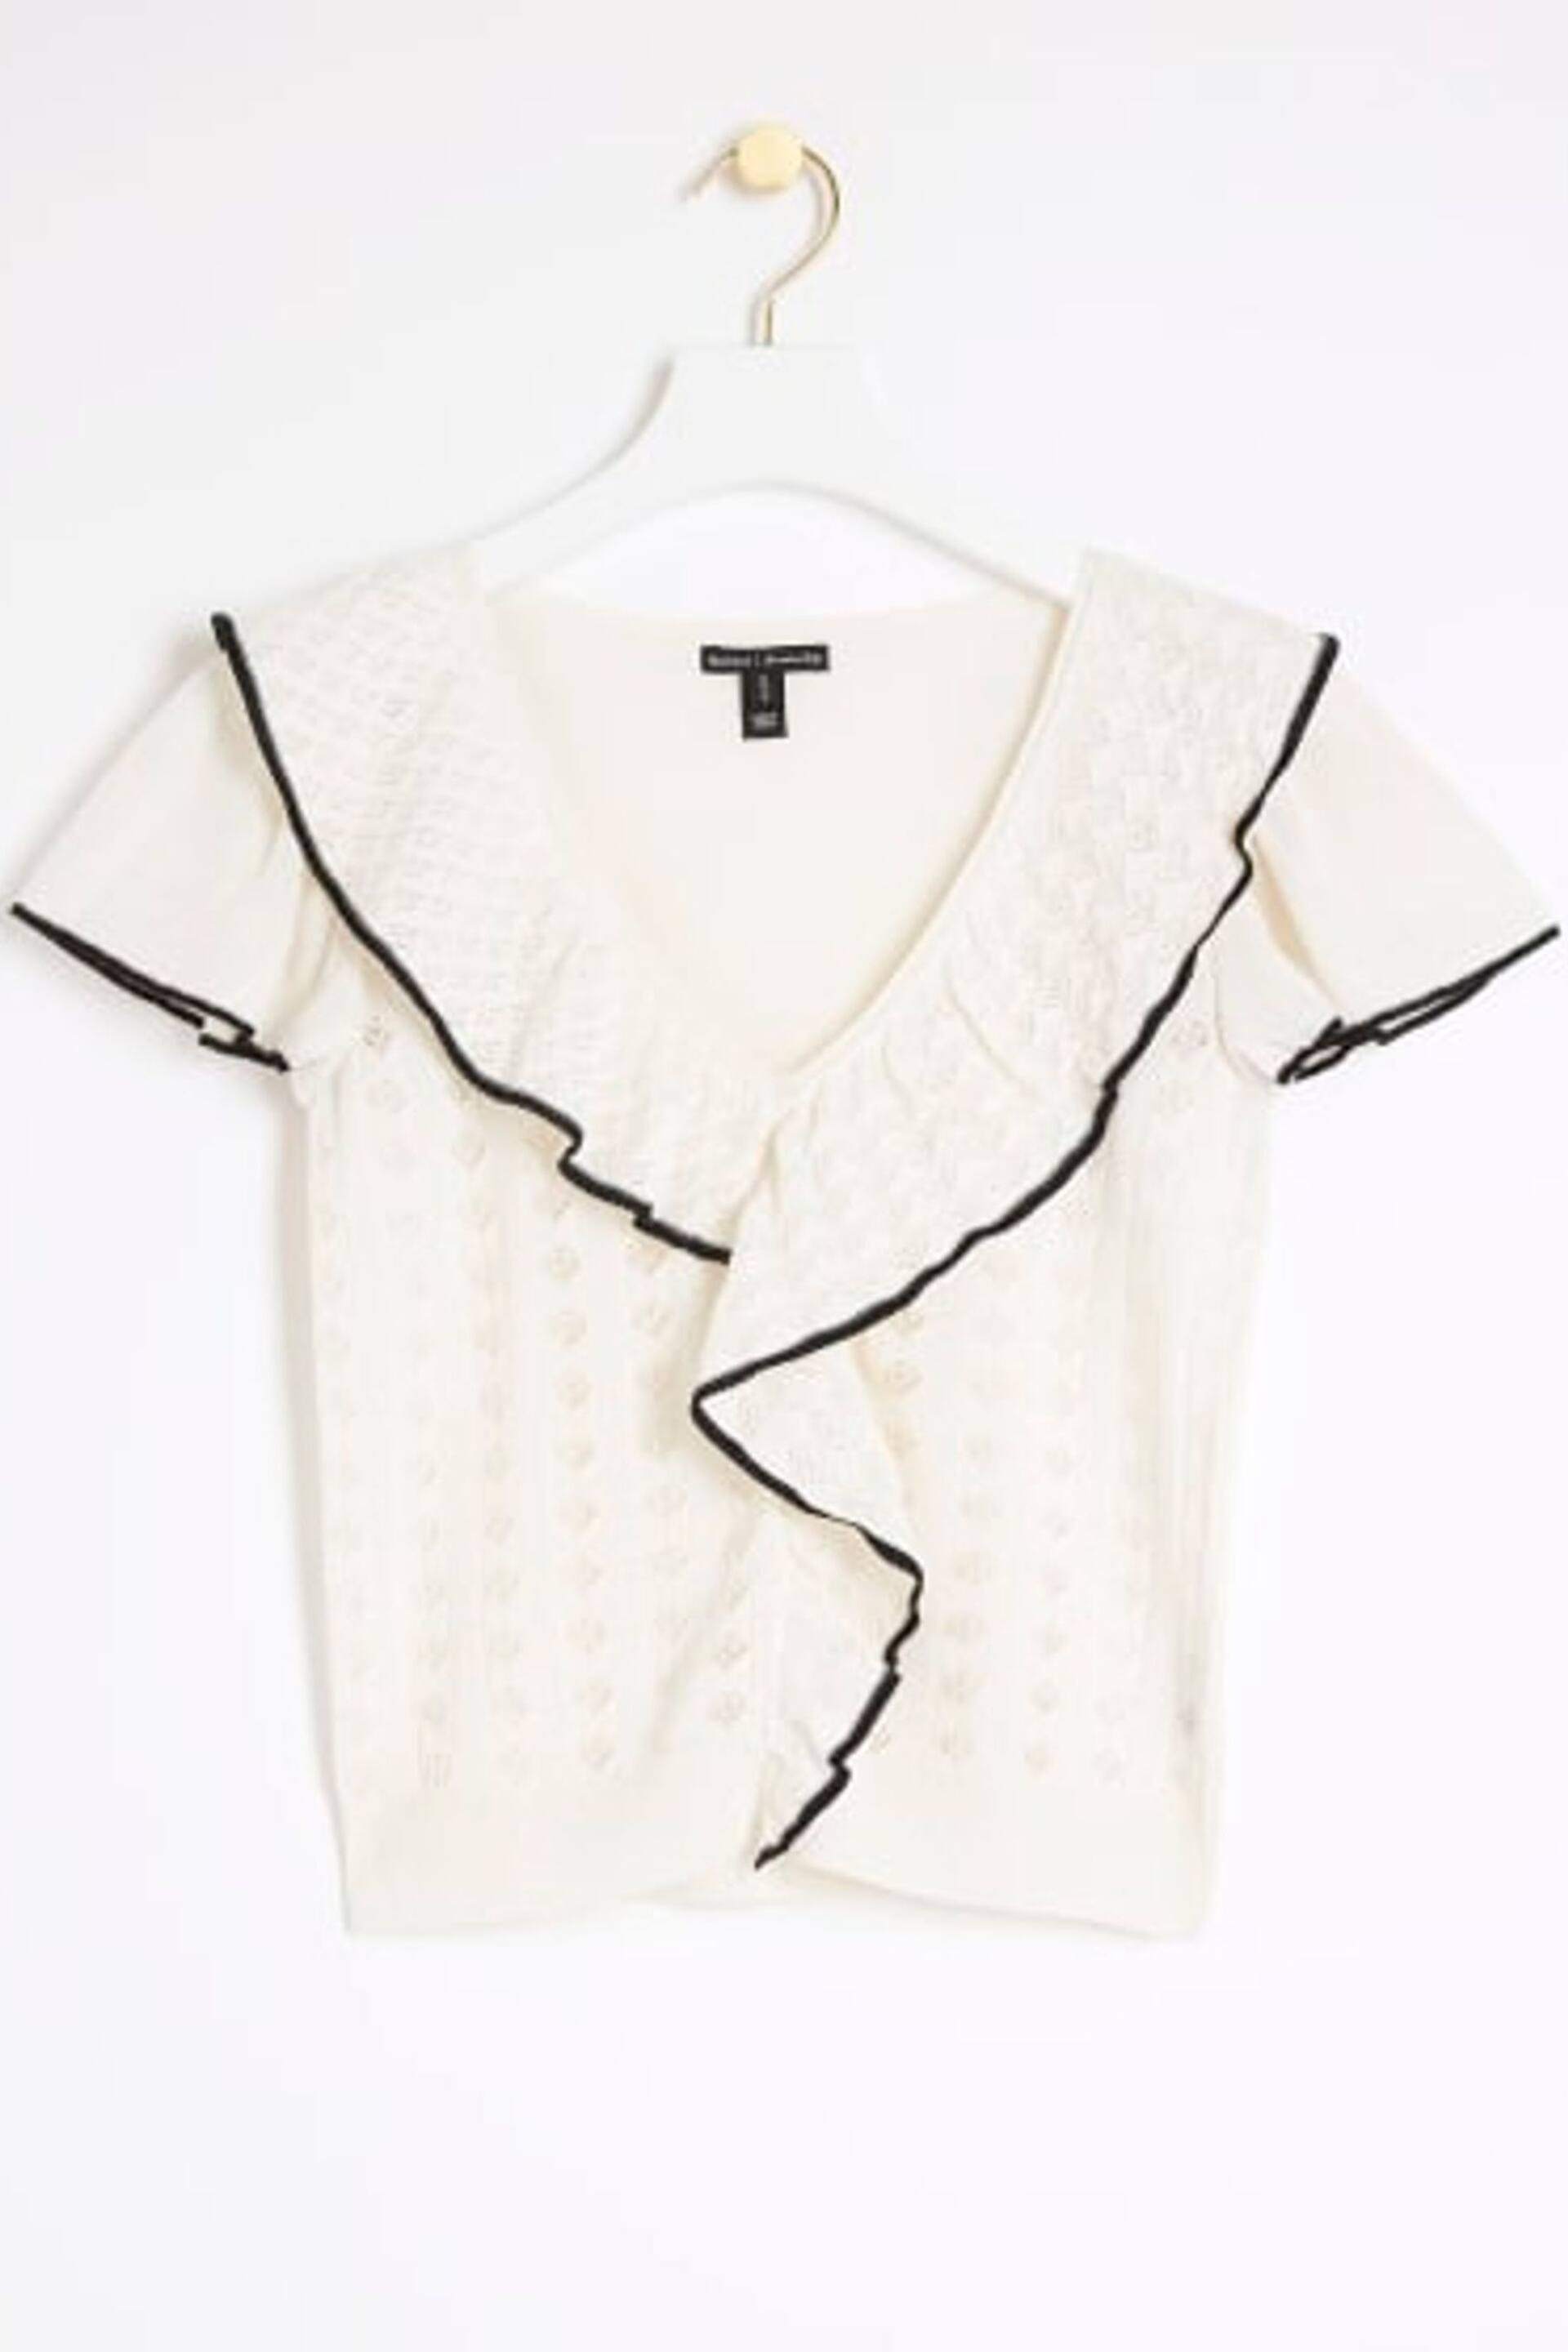 River Island Cream Frill Detailed Knitted Top - Image 5 of 6